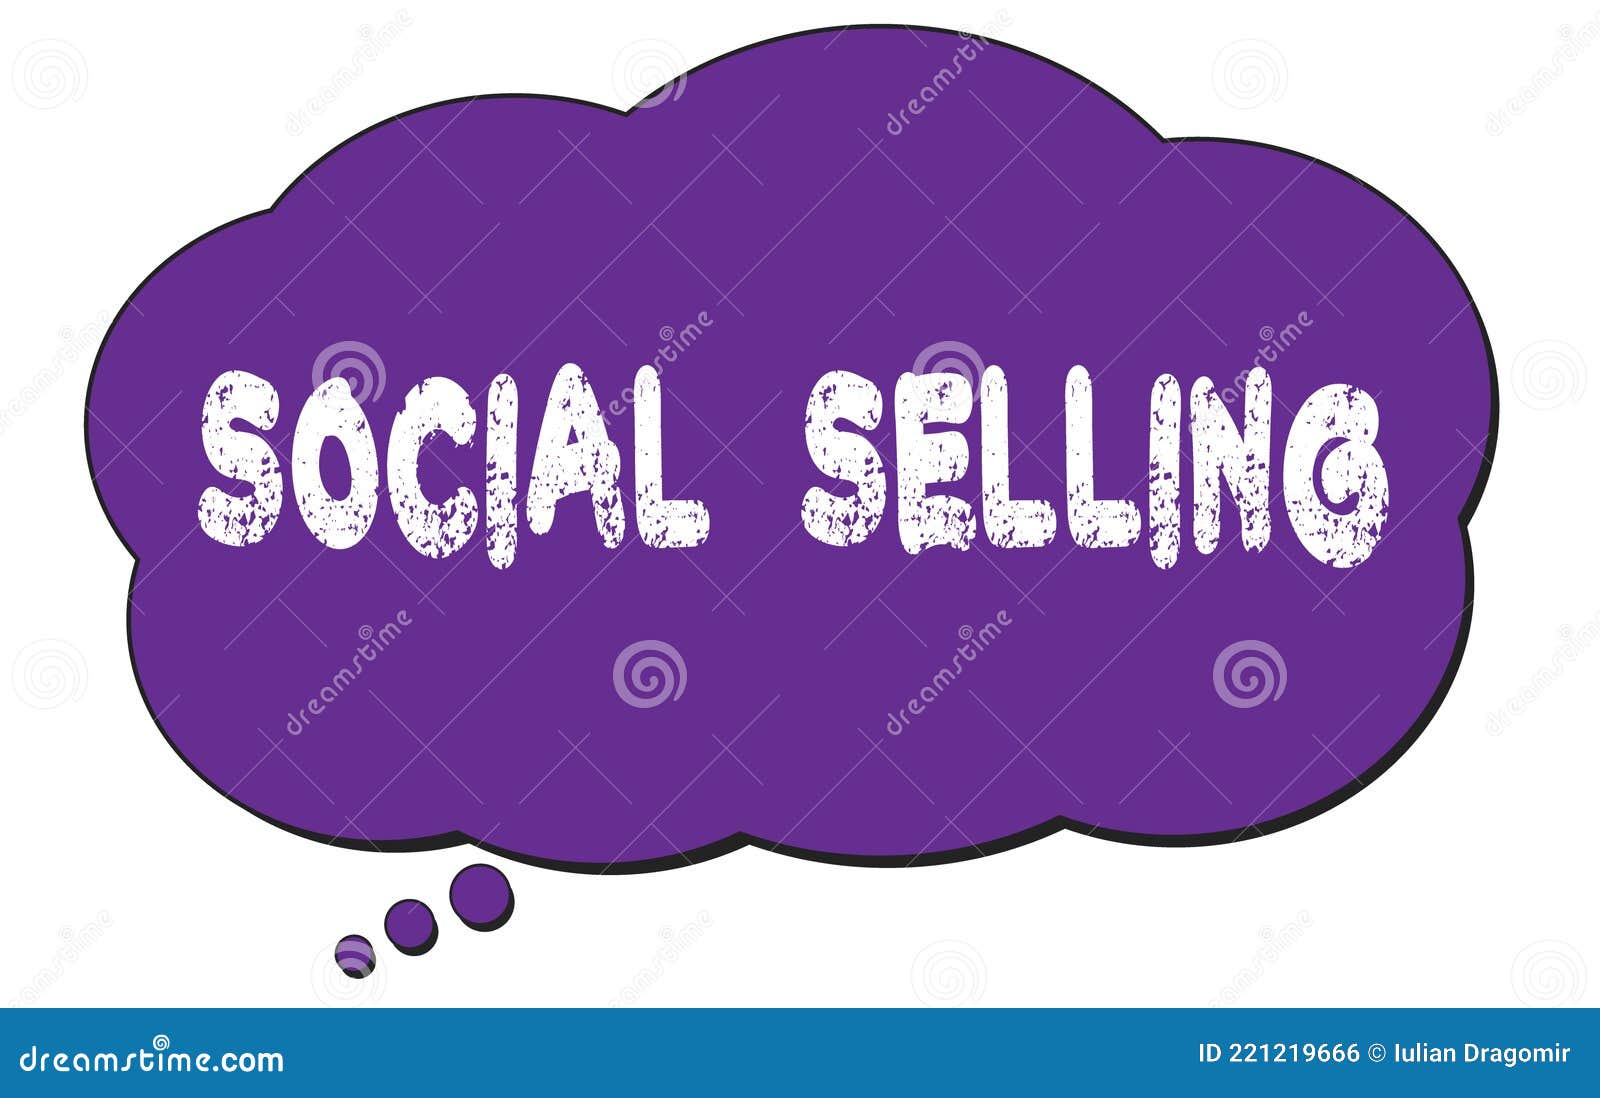 social  selling text written on a violet cloud bubble